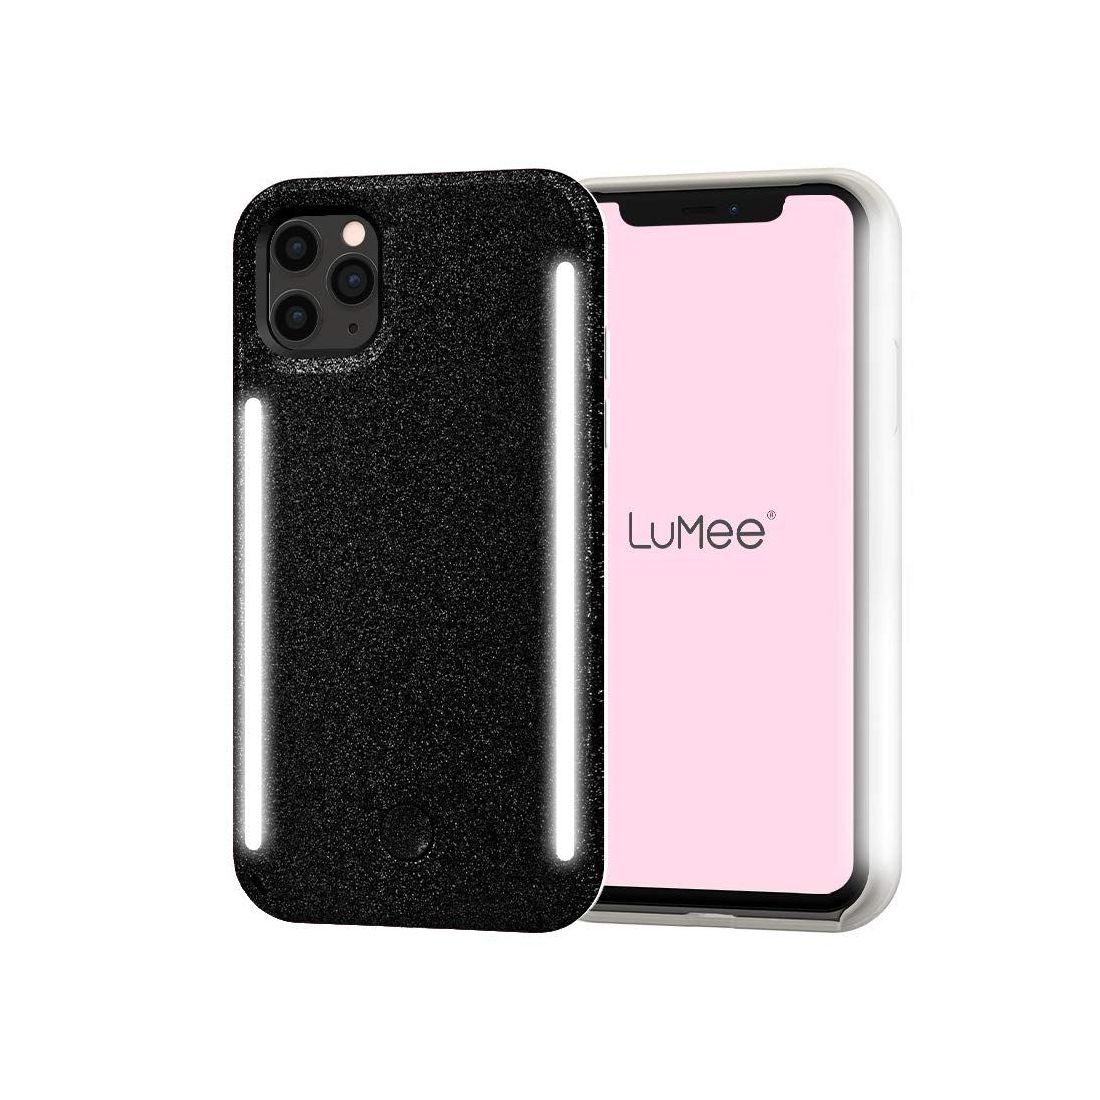 Lumee Duo Case Black Glitter for iPhone 11 Pro Max